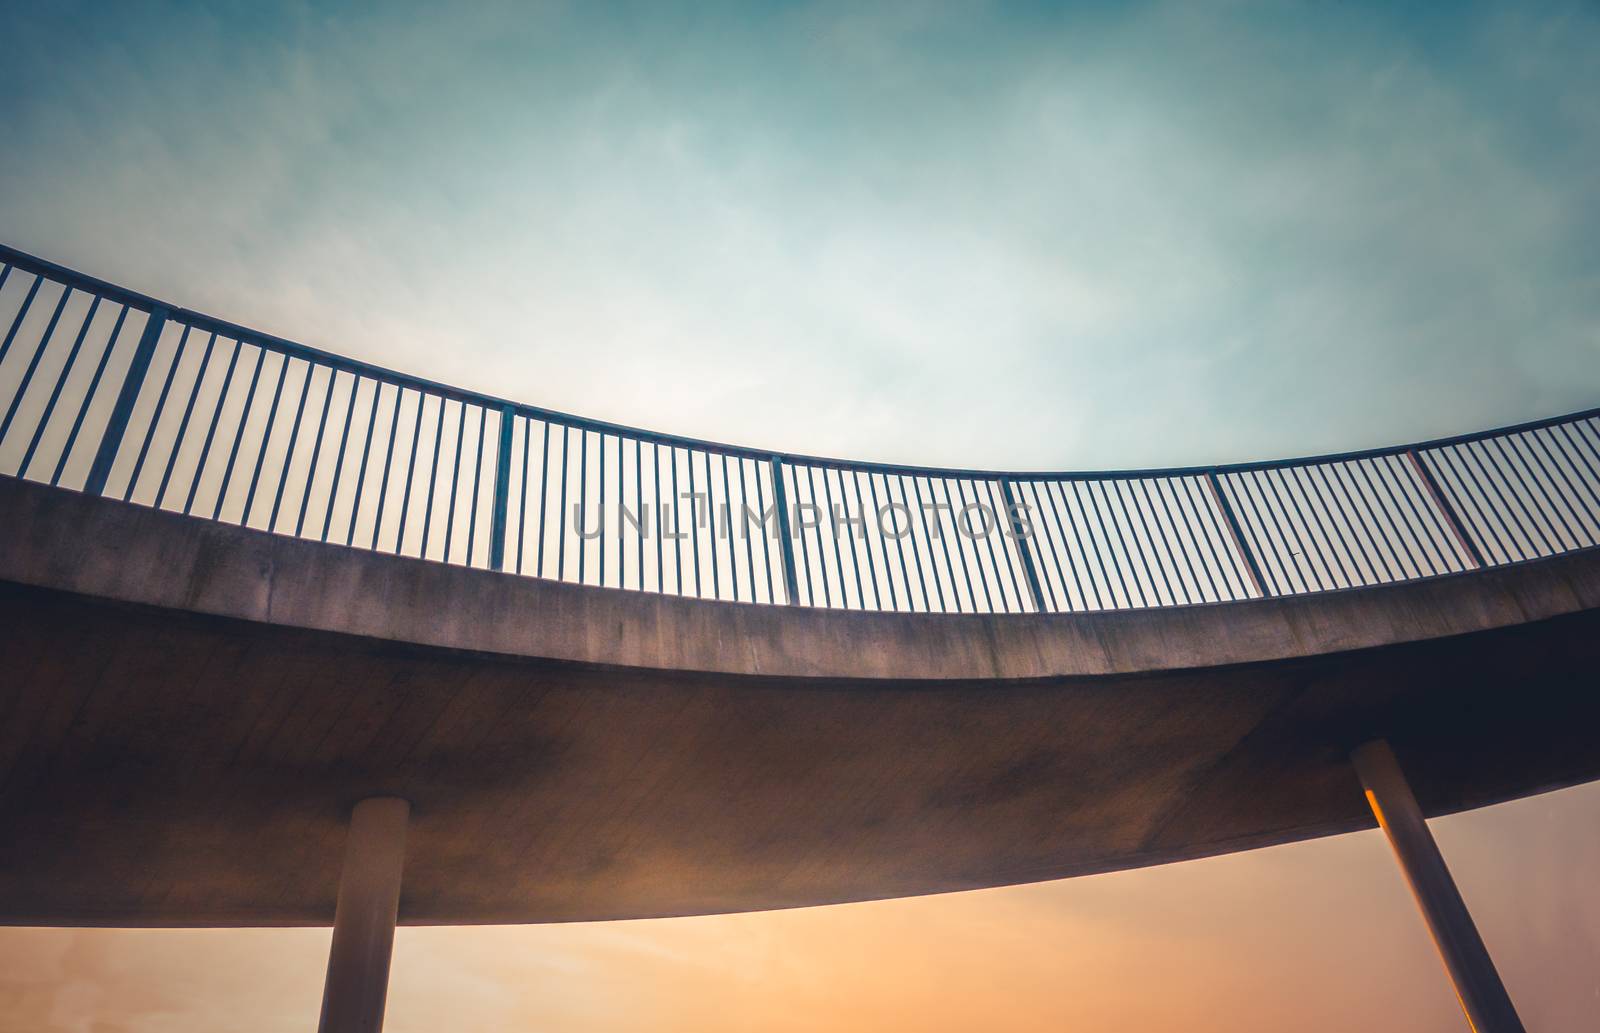 Abstract Urban Architecture Detail Of A Curved Footbridge Overpass At Sunset With Copy Space